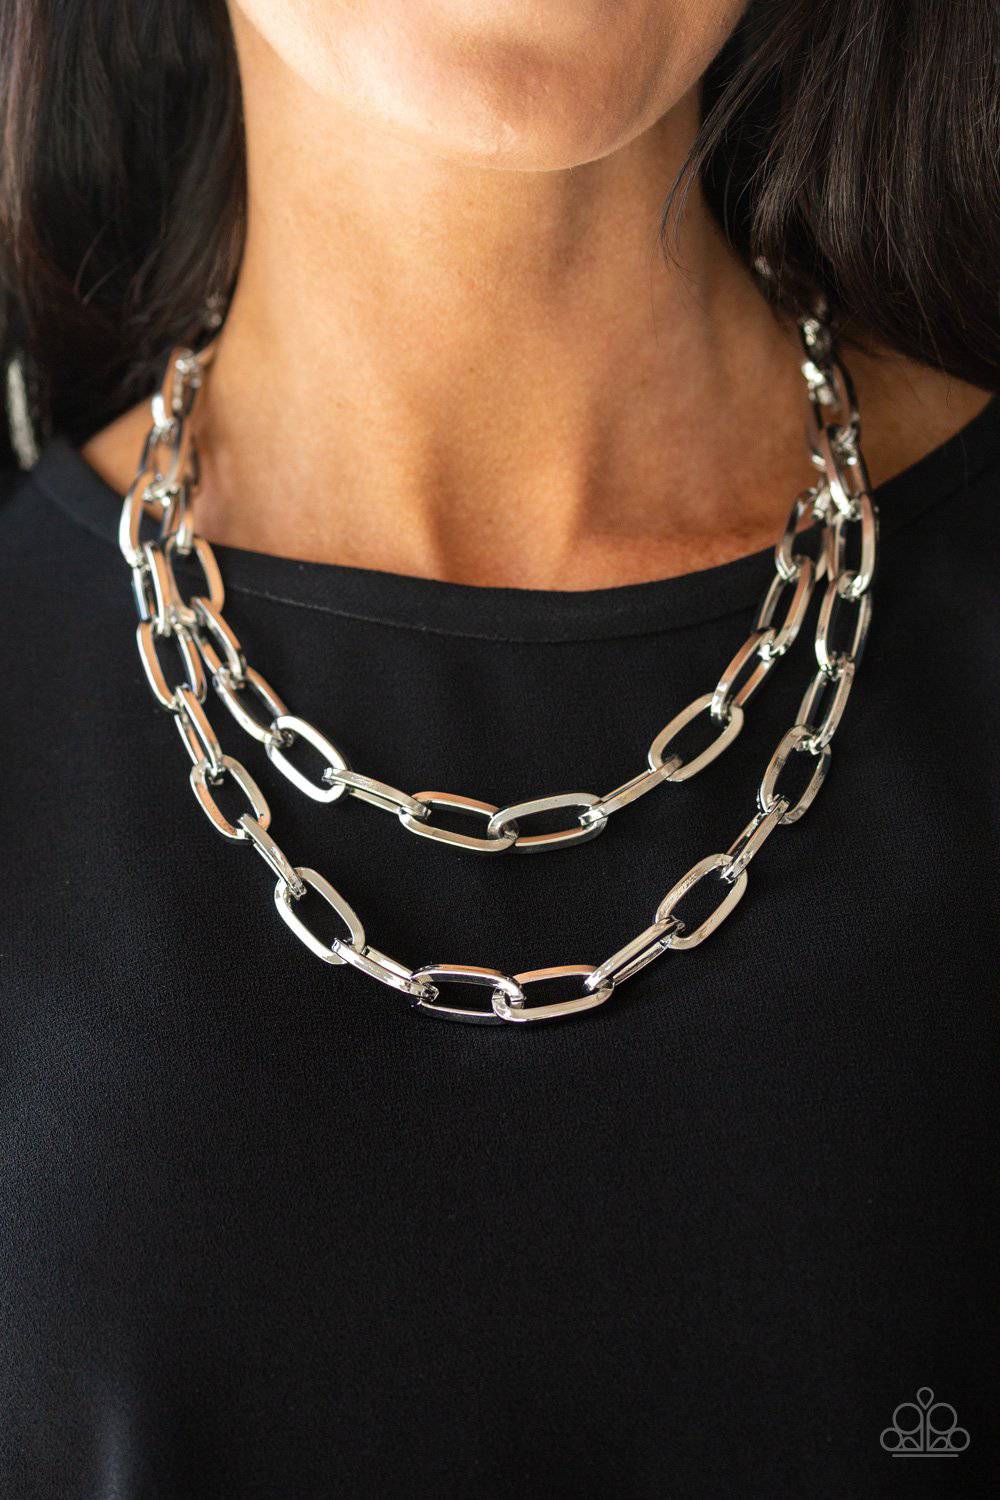 Make A CHAINge - Silver Chain Link Necklace - Paparazzi Accessories - GlaMarous Titi Jewels